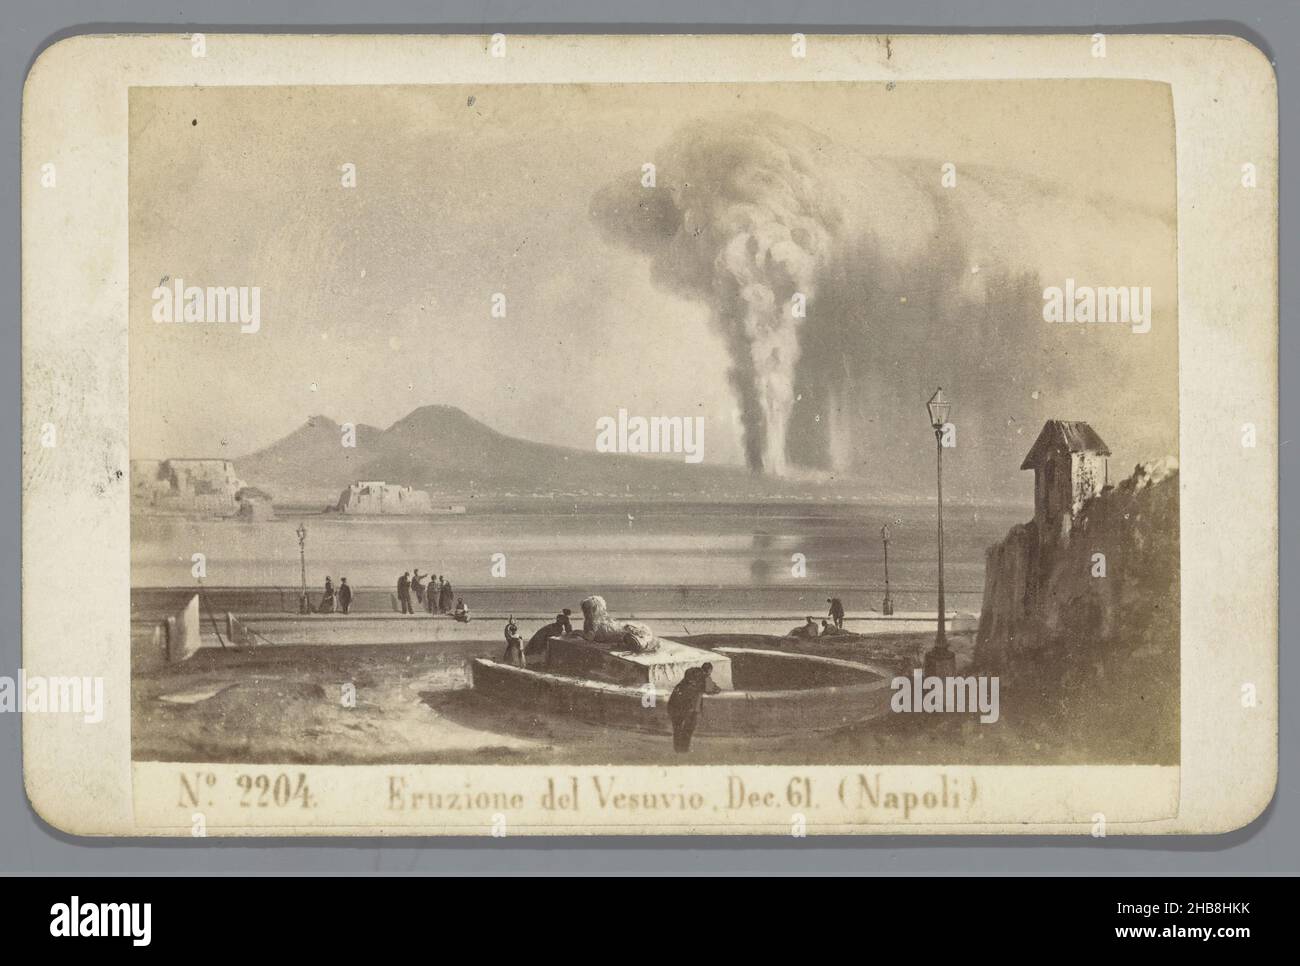 Photoreproduction of a painting of the eruption of Vesuvius in 1861, Eruzione del Vesuvio. Dec. 61 (Napoli) (title on object), Giorgio Sommer (attributed to), after: anonymous, 1861 - 1888, cardboard, paper, albumen print, height 65 mm × width 103 mm Stock Photo